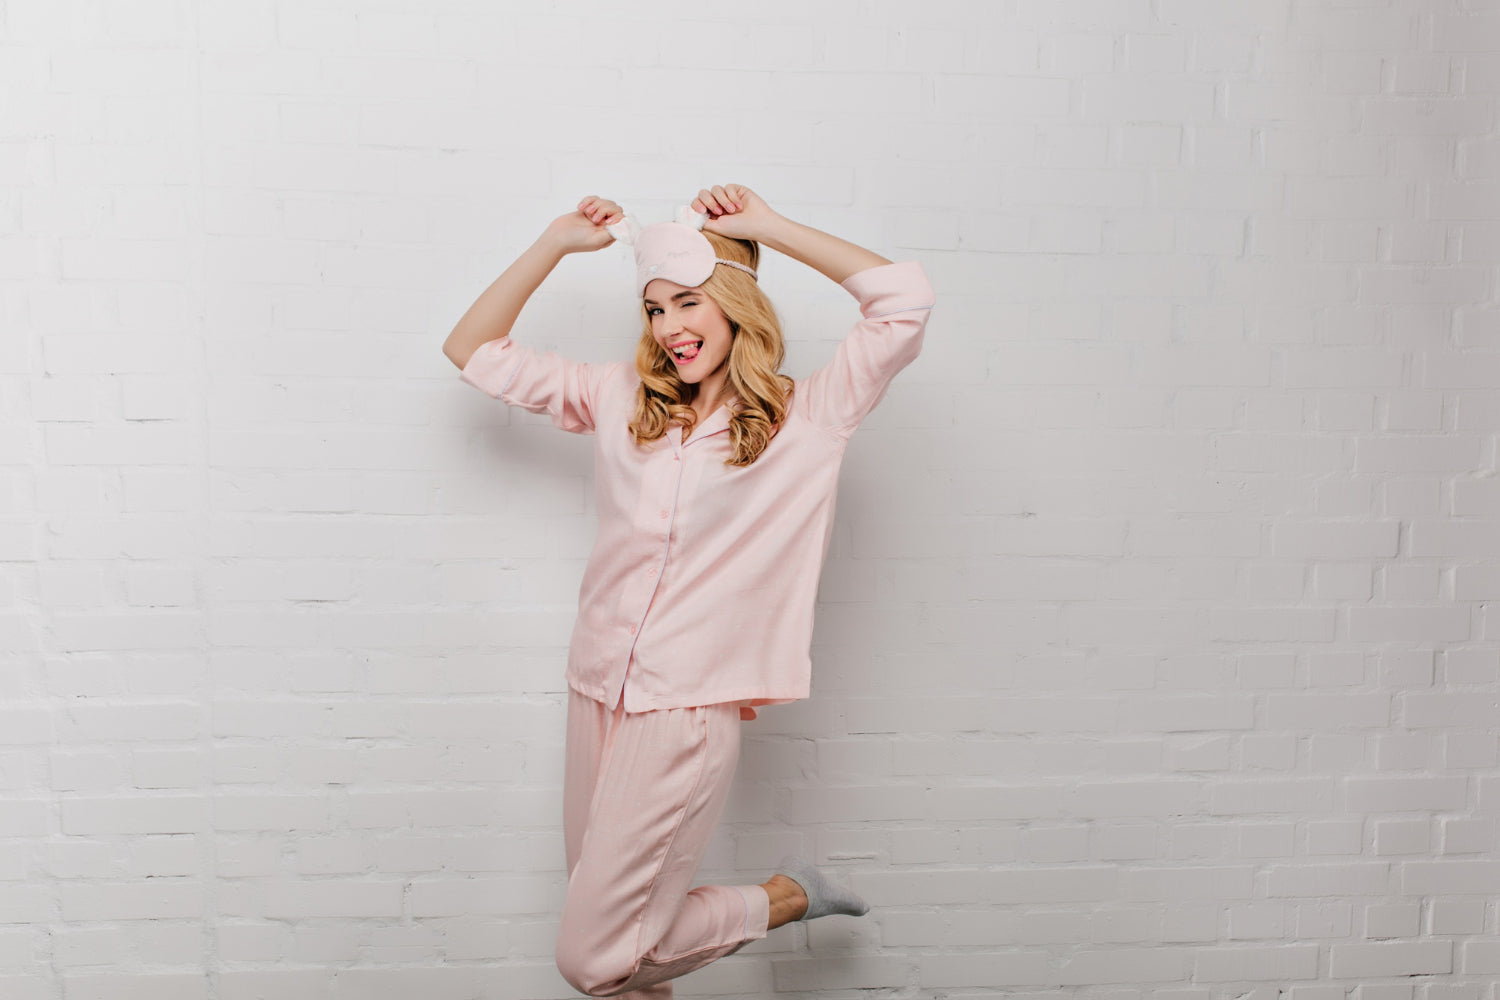 Reasons Why You Should Stay in Pajamas at Home